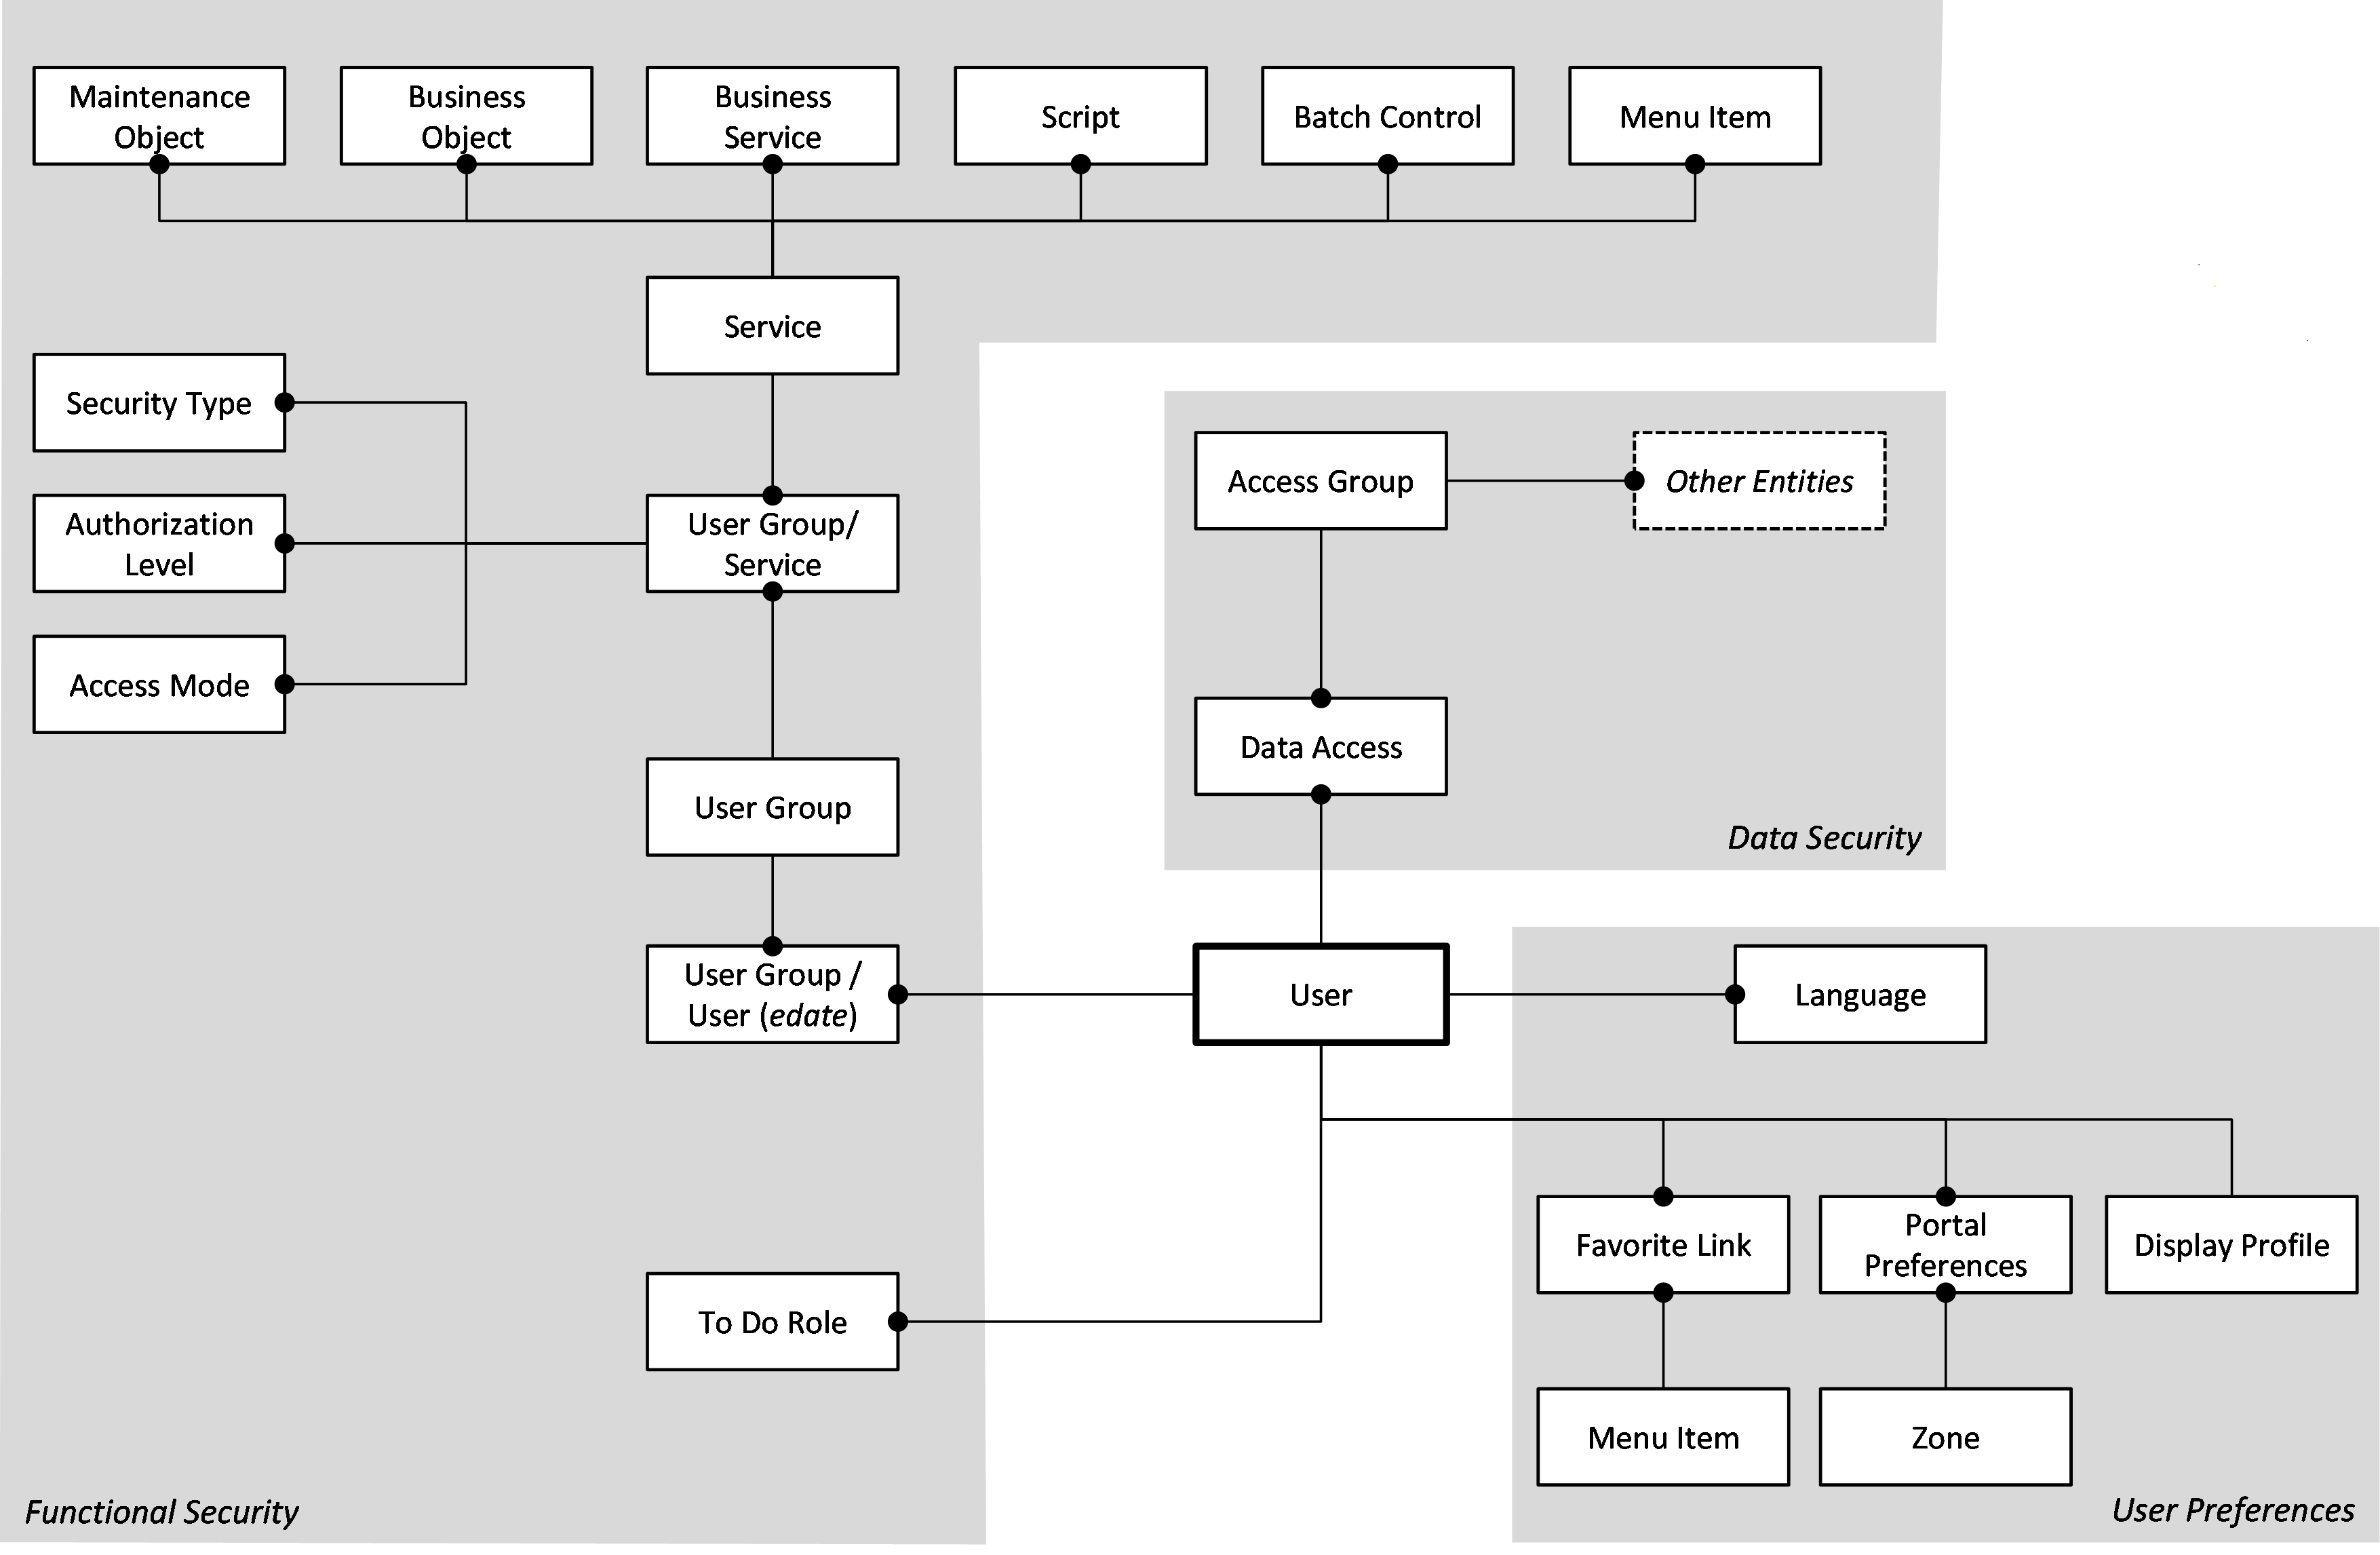 Data model describing the security authorization model in Customer Care and Billing.